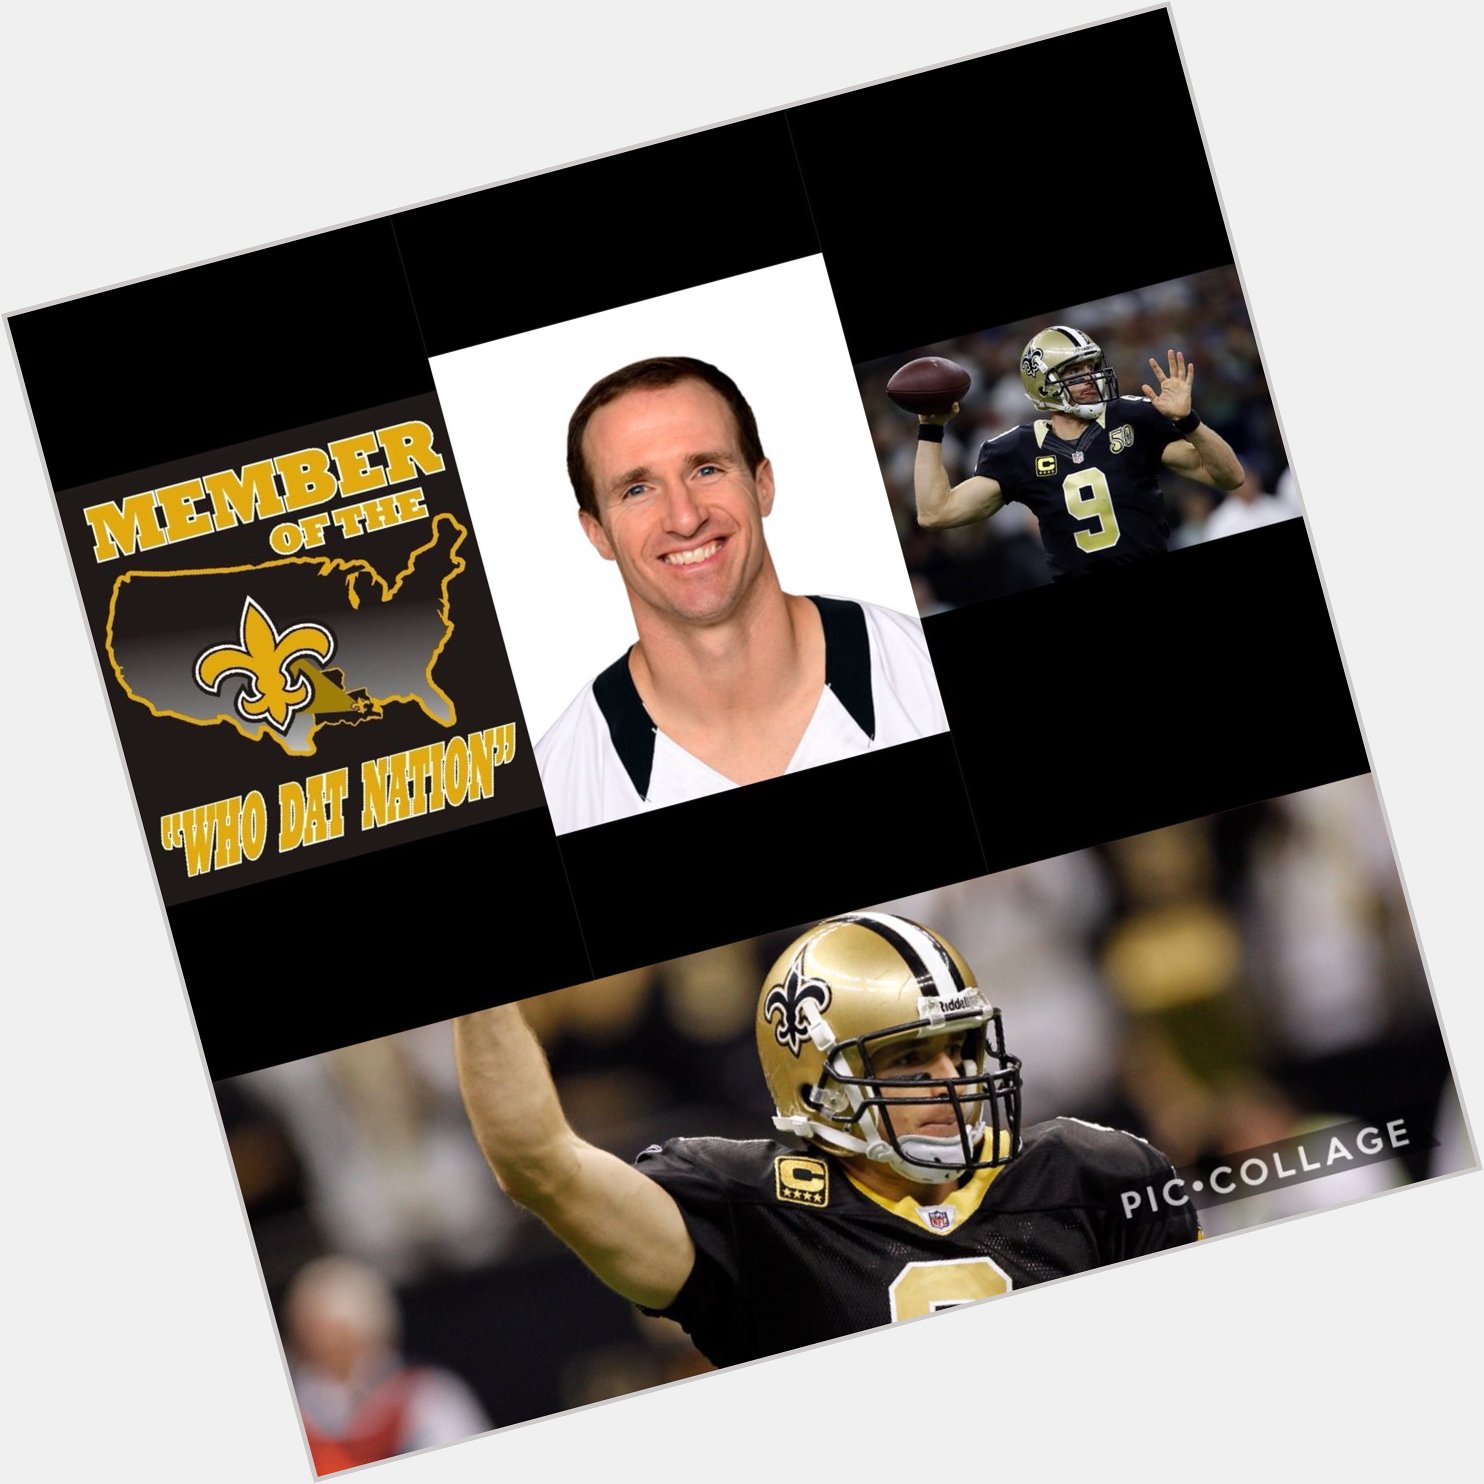 Happy birthday to New orlean saints player Drew brees I hope you have a great birthday       